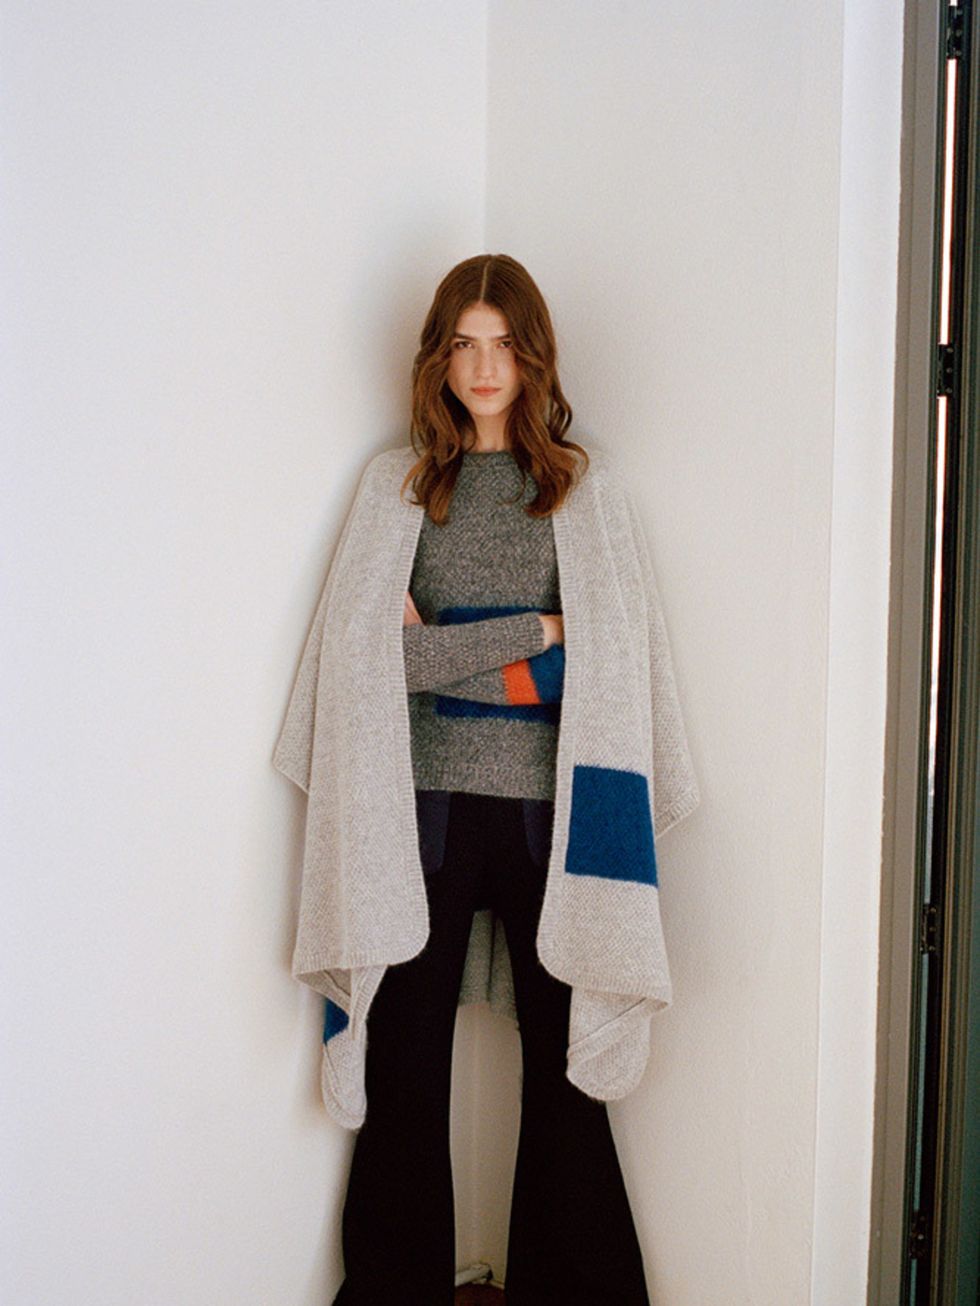 <p><strong>Eudon Choi / Brora</strong></p>

<p><span style="line-height:1.6">Luxury knit label Brora, who has enlisted London designer Eudon Choi to create a 15-piece capsule collection that launches this month. Taking 1970s après-ski as his starting poin